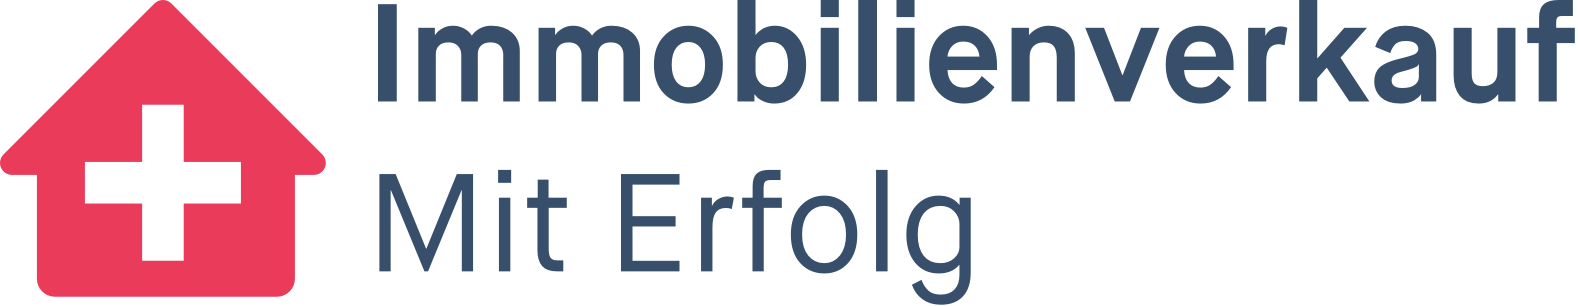 immobiliern-mit-Erfolg-Logo-1.png